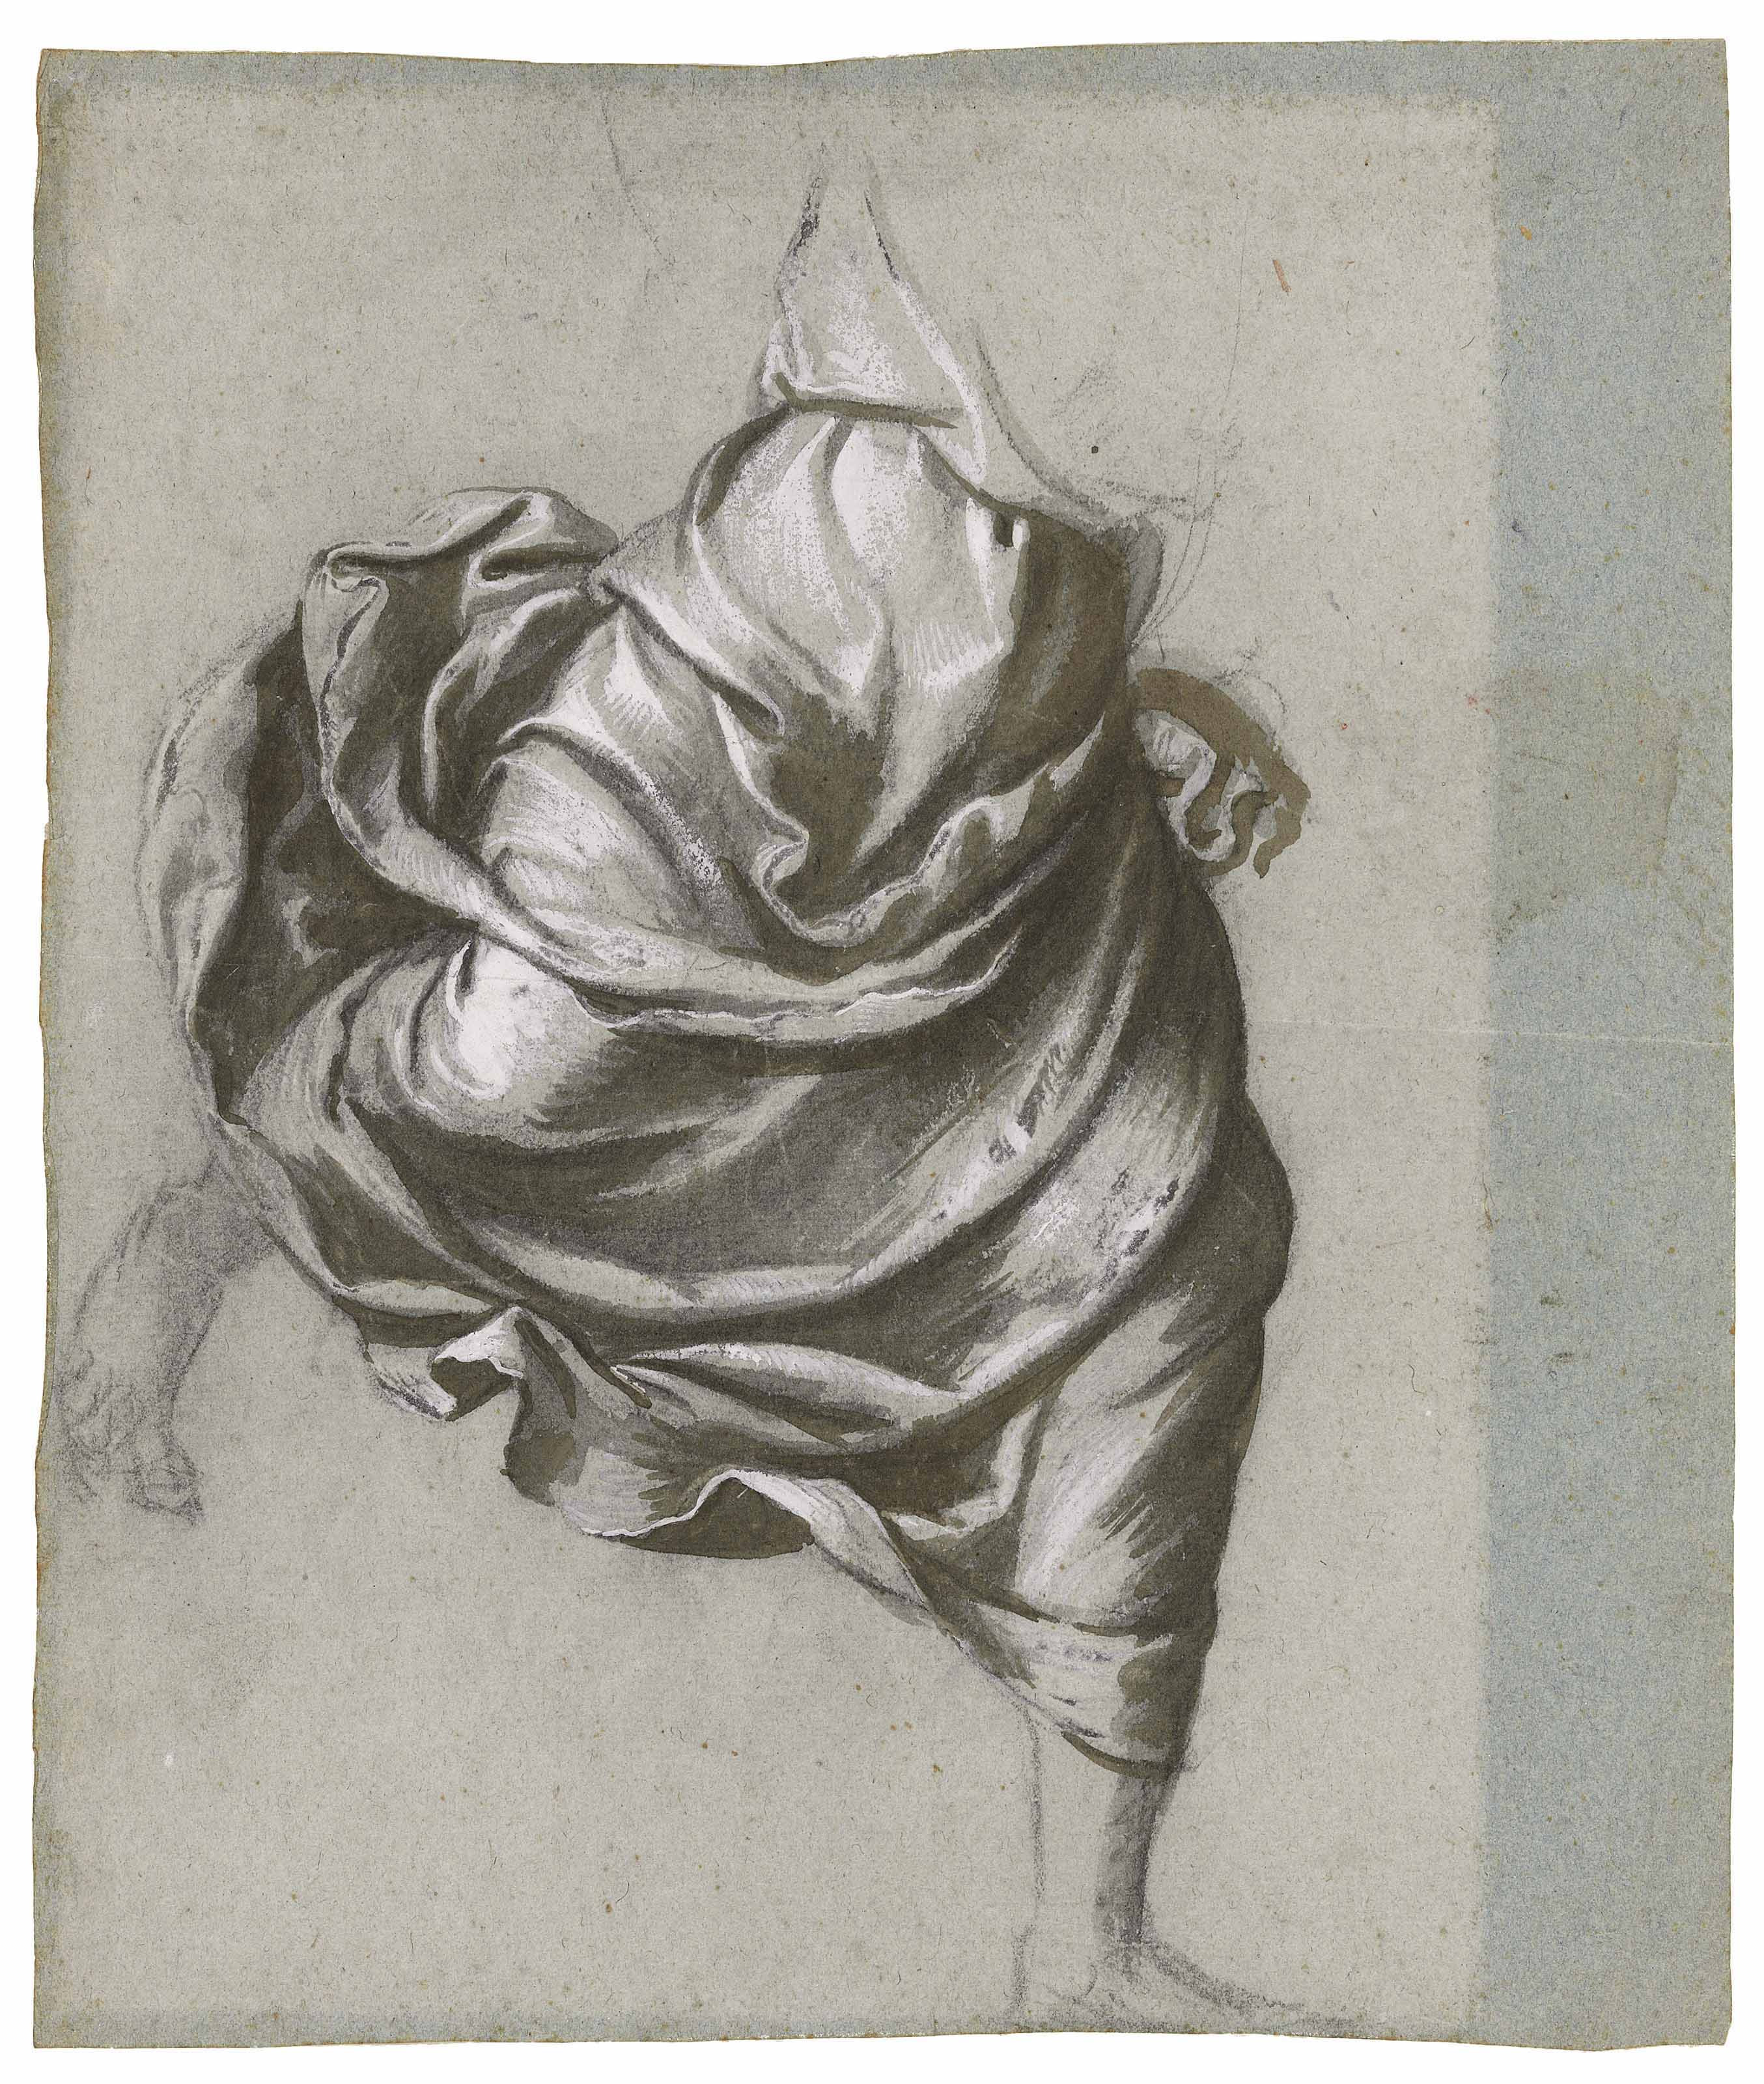 A drapery around the torso of a running figure (attributed to Pomponio Amalteo) - Lot 5 from Christie’s upcoming Old Master Drawings